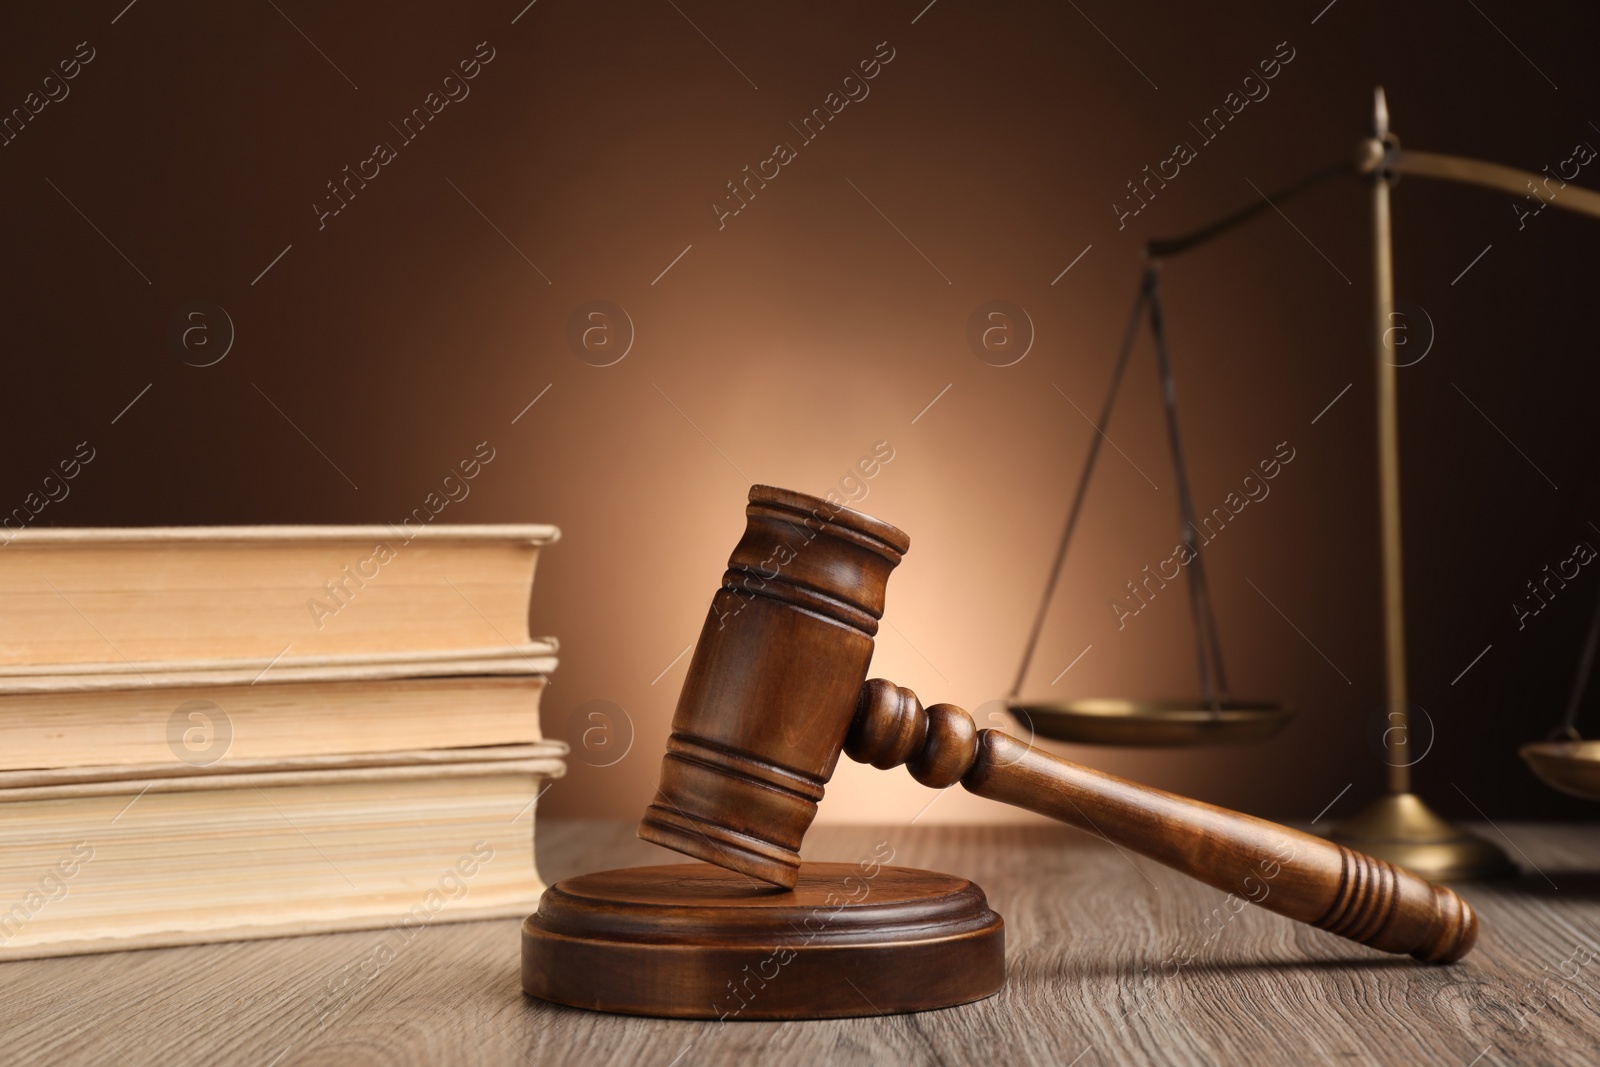 Photo of Judge's gavel with sound block, scales of justice and books on wooden table against brown background